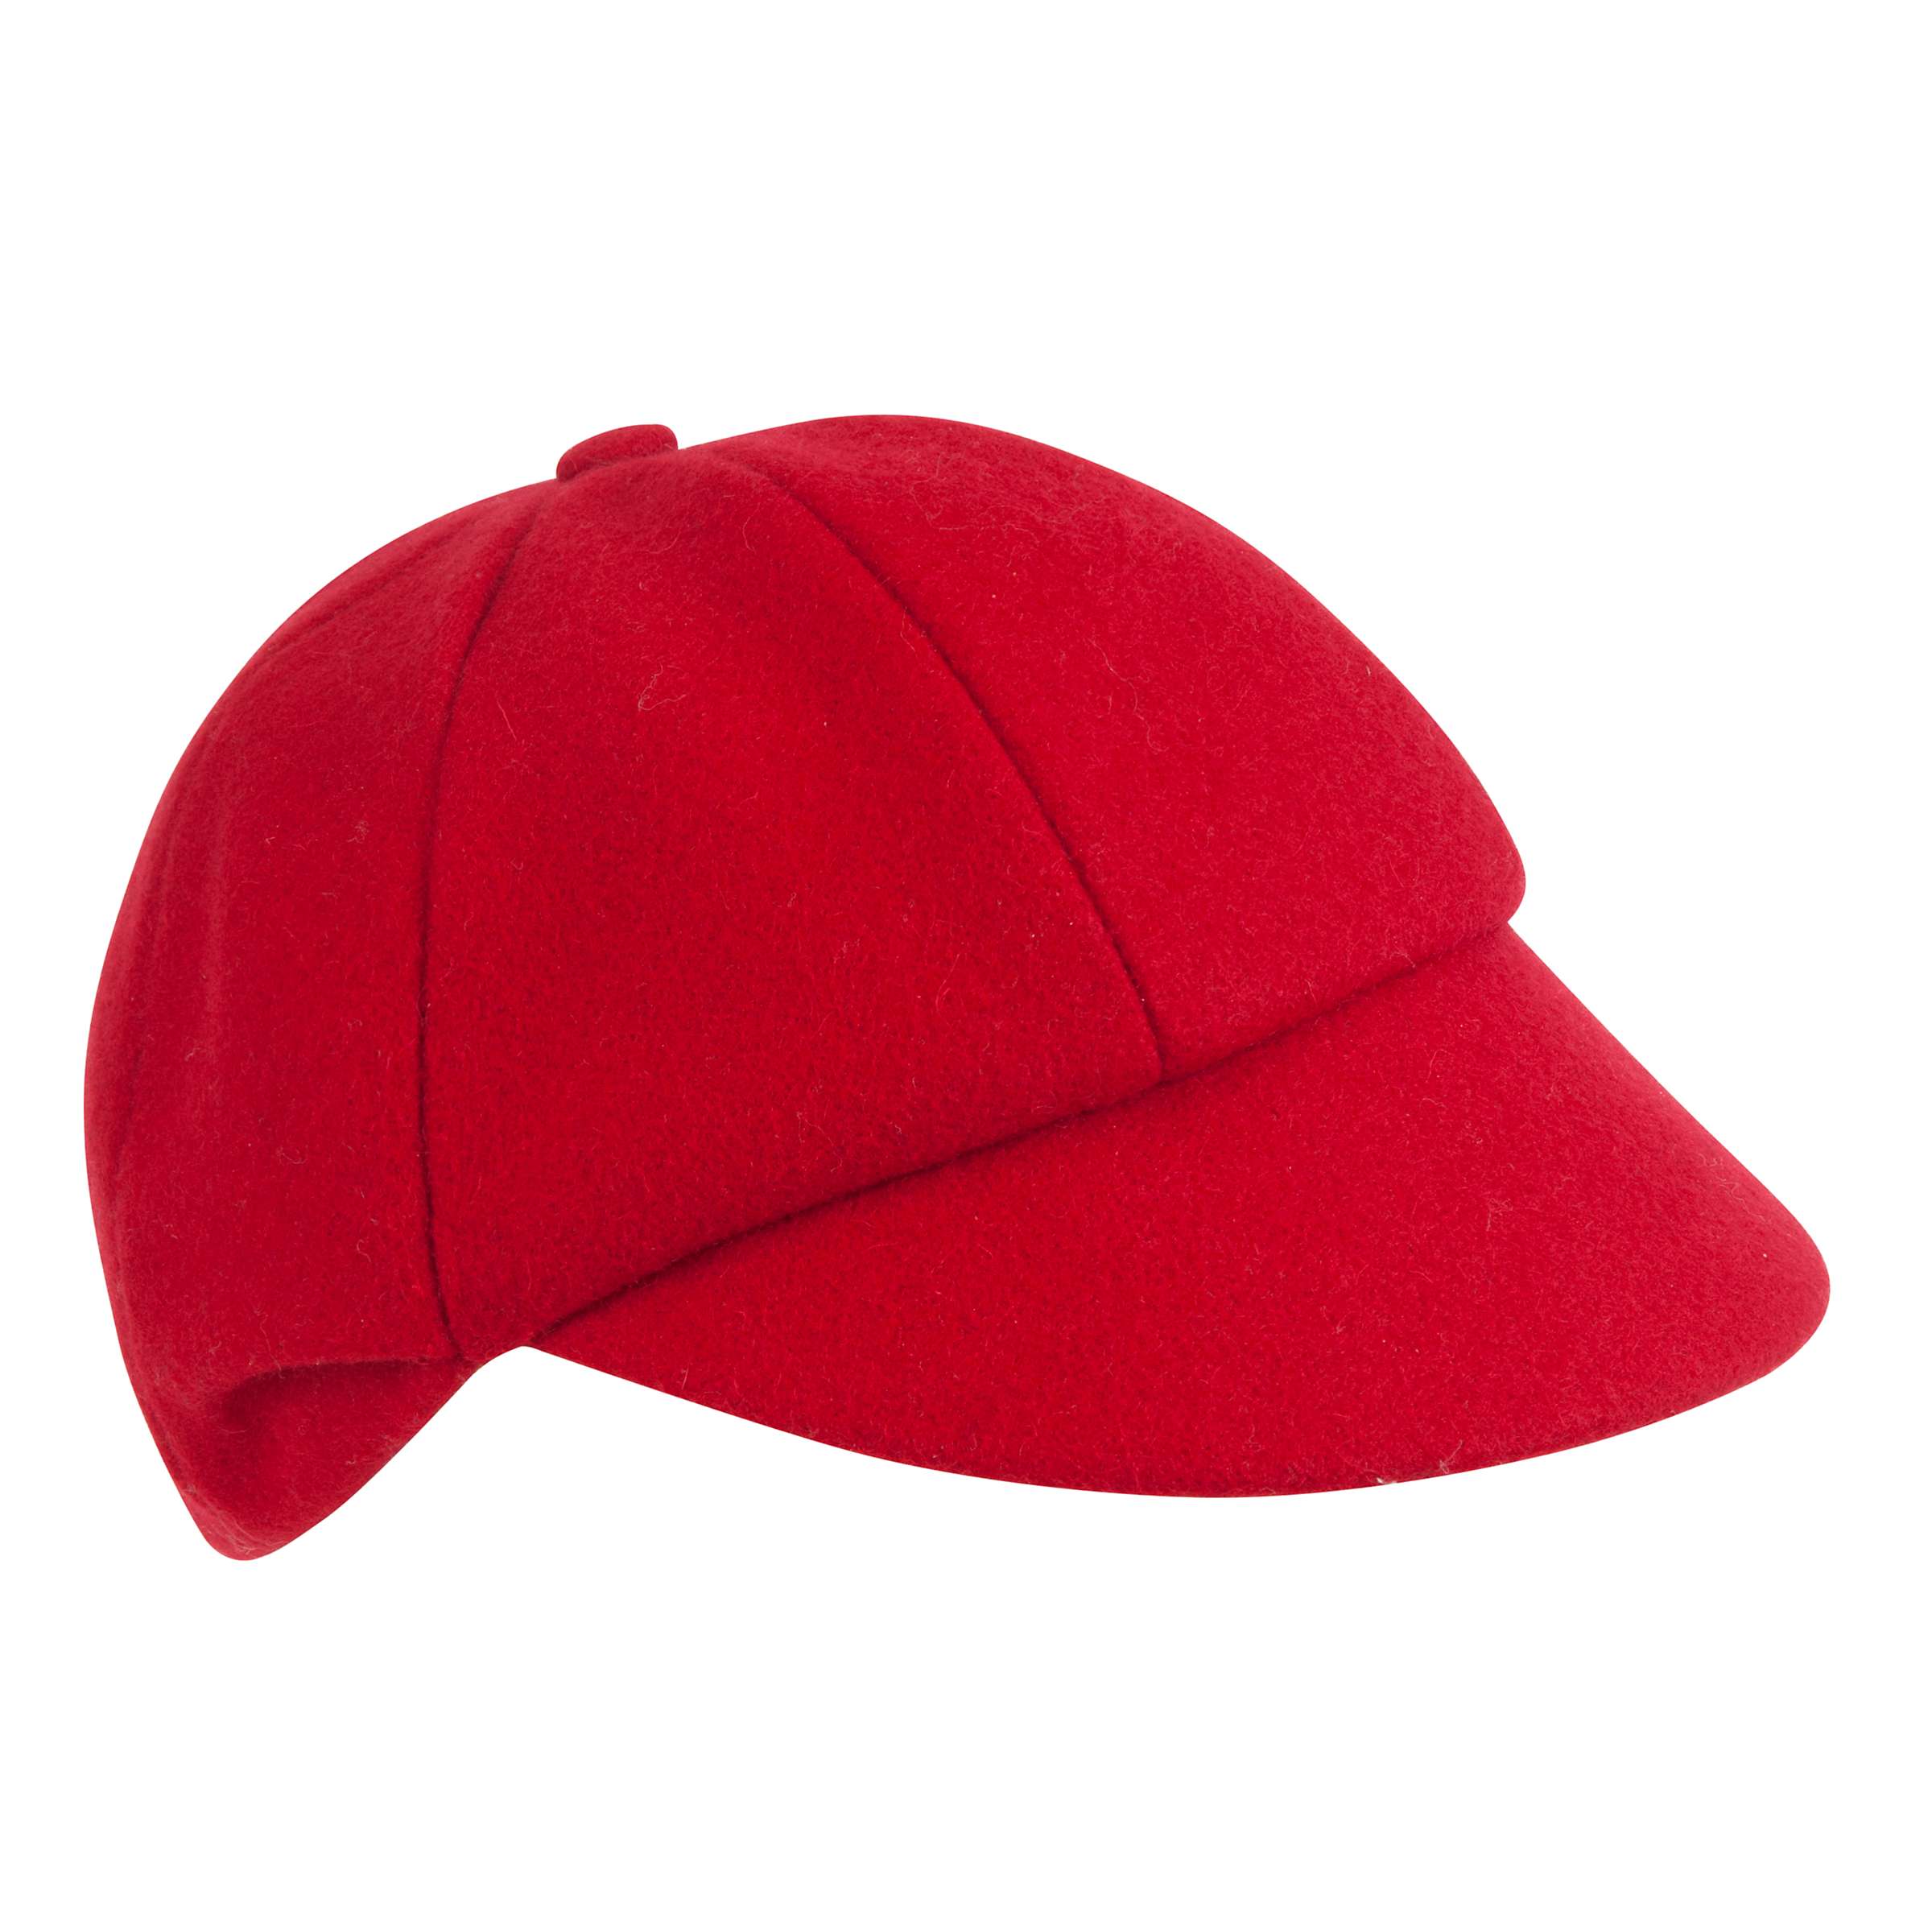 Buy Holy Cross RC Primary School Boys' Cap, Red Online at johnlewis.com